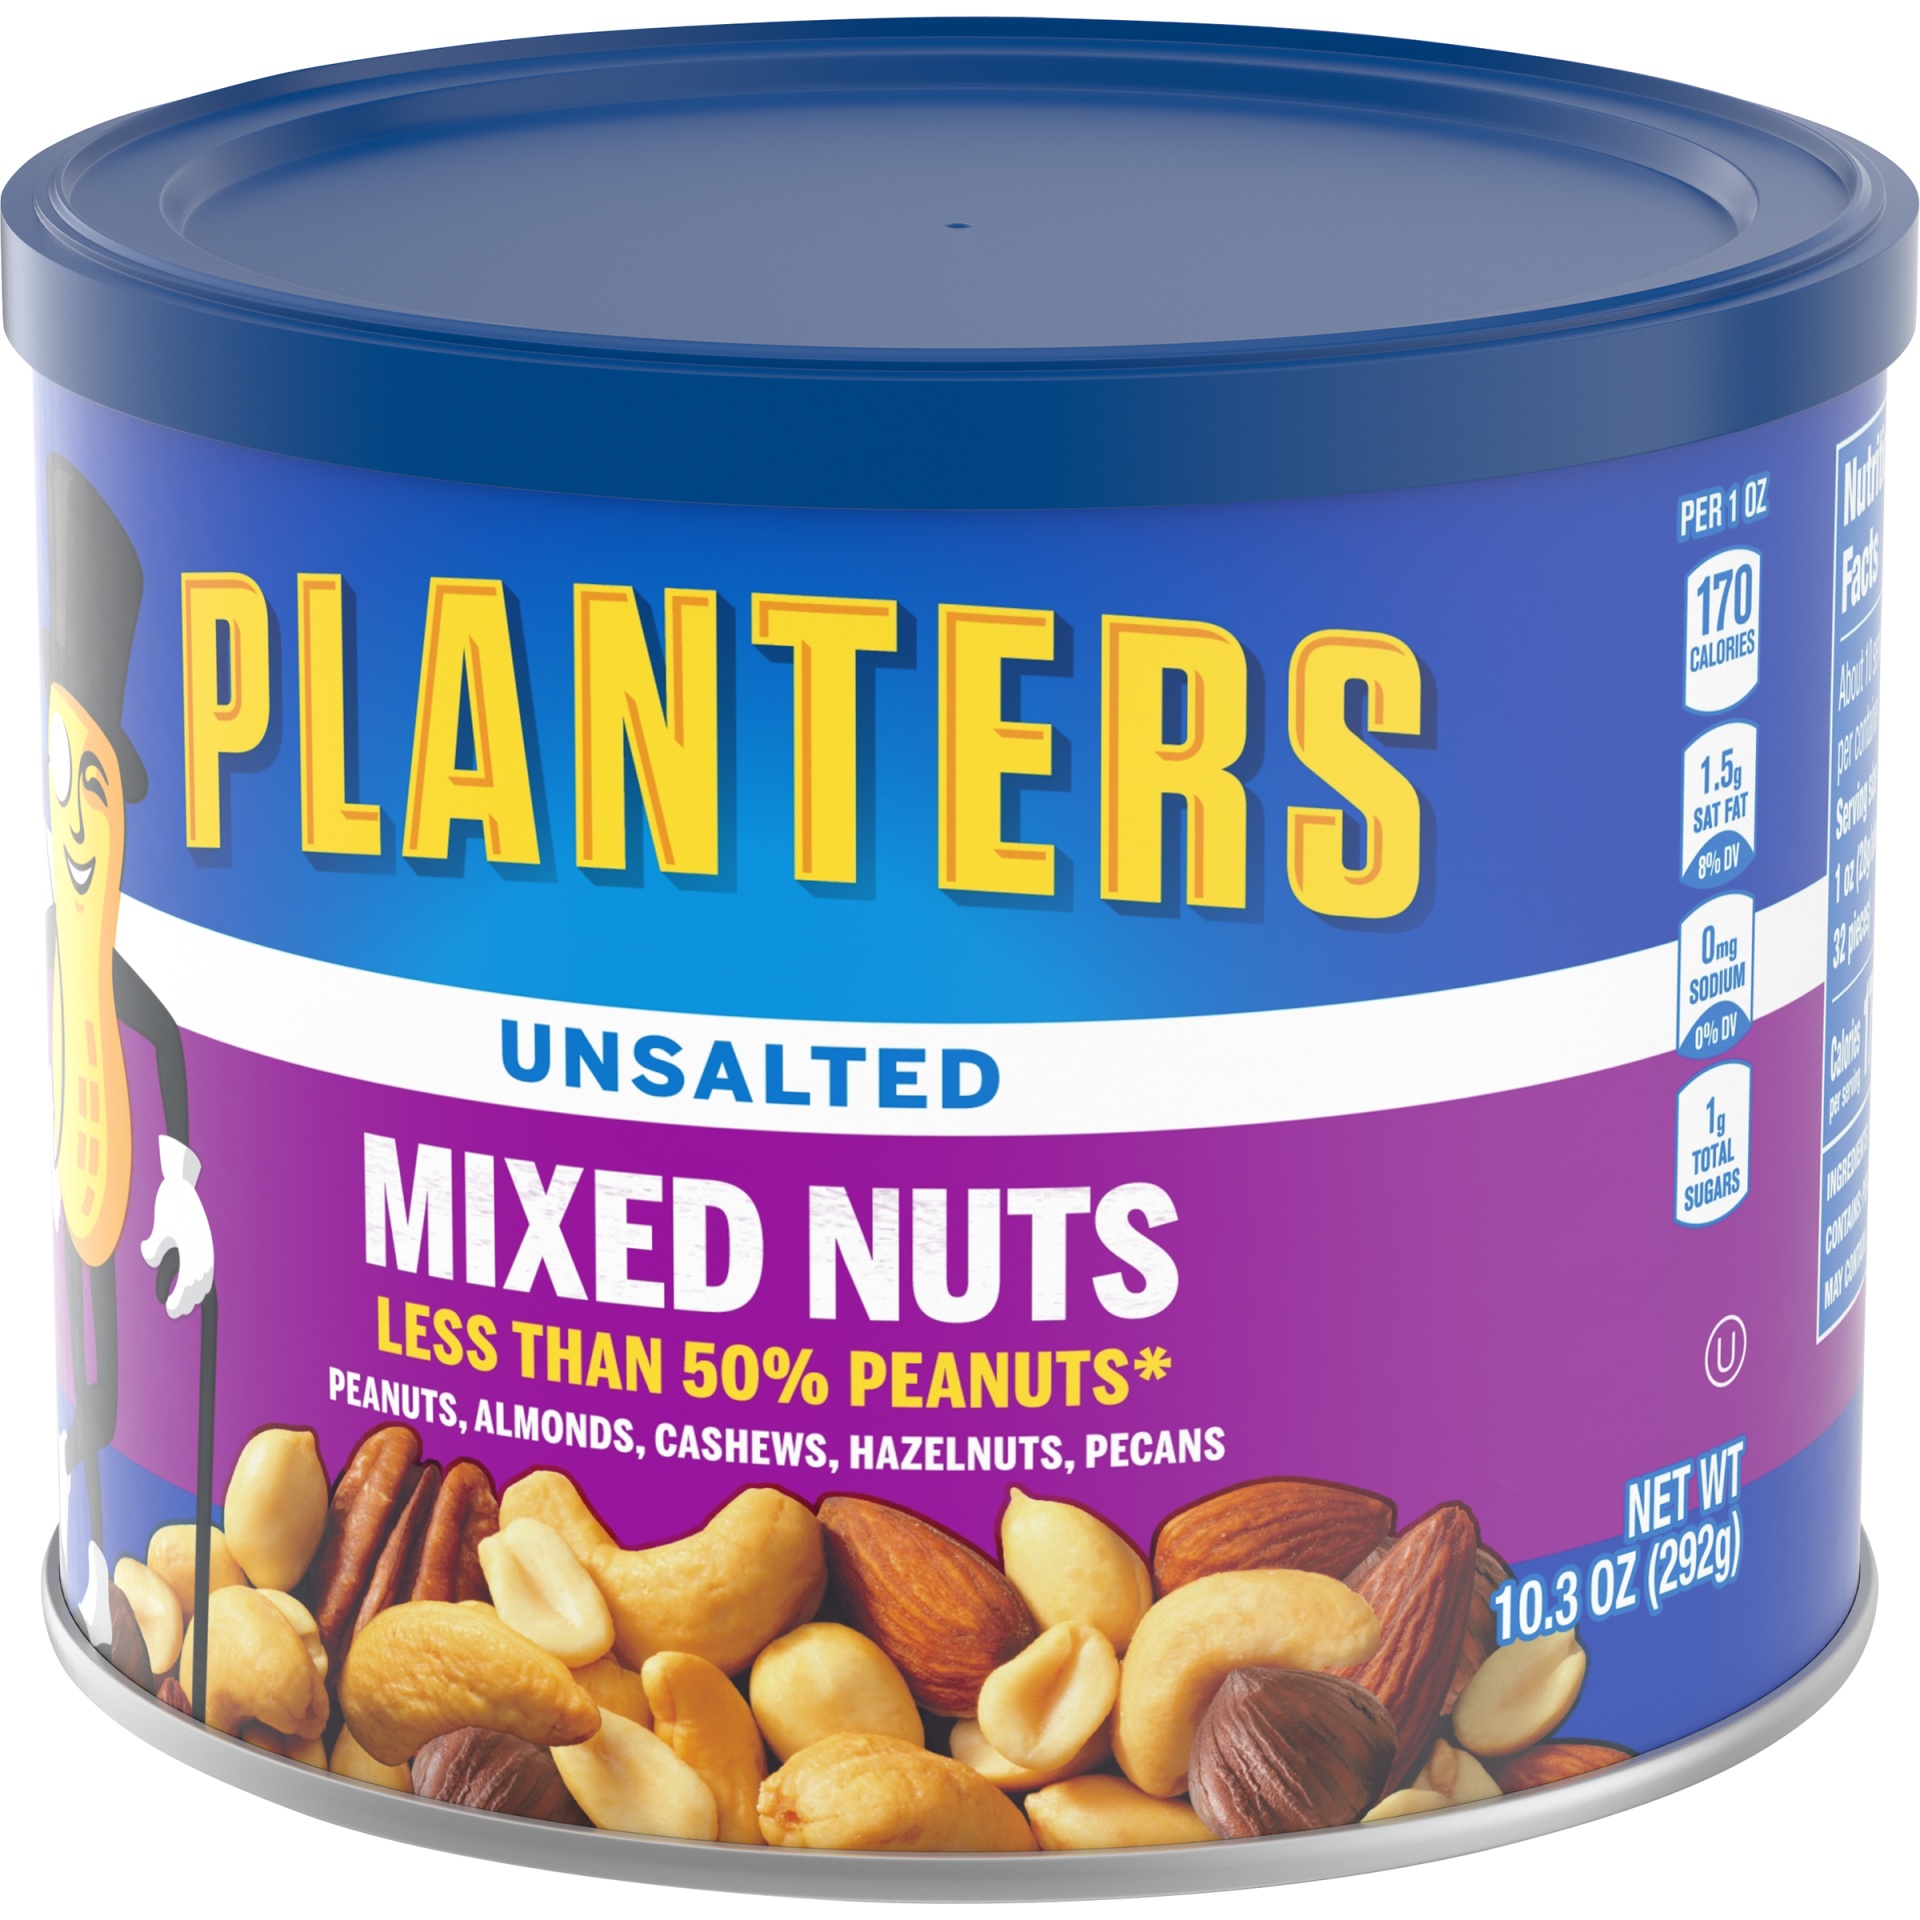 slide 5 of 8, Planters Unsalted Mixed Nuts Less Than 50% Peanuts with Peanuts, Almonds, Cashews, Hazelnuts & Pecans, 10.3 oz